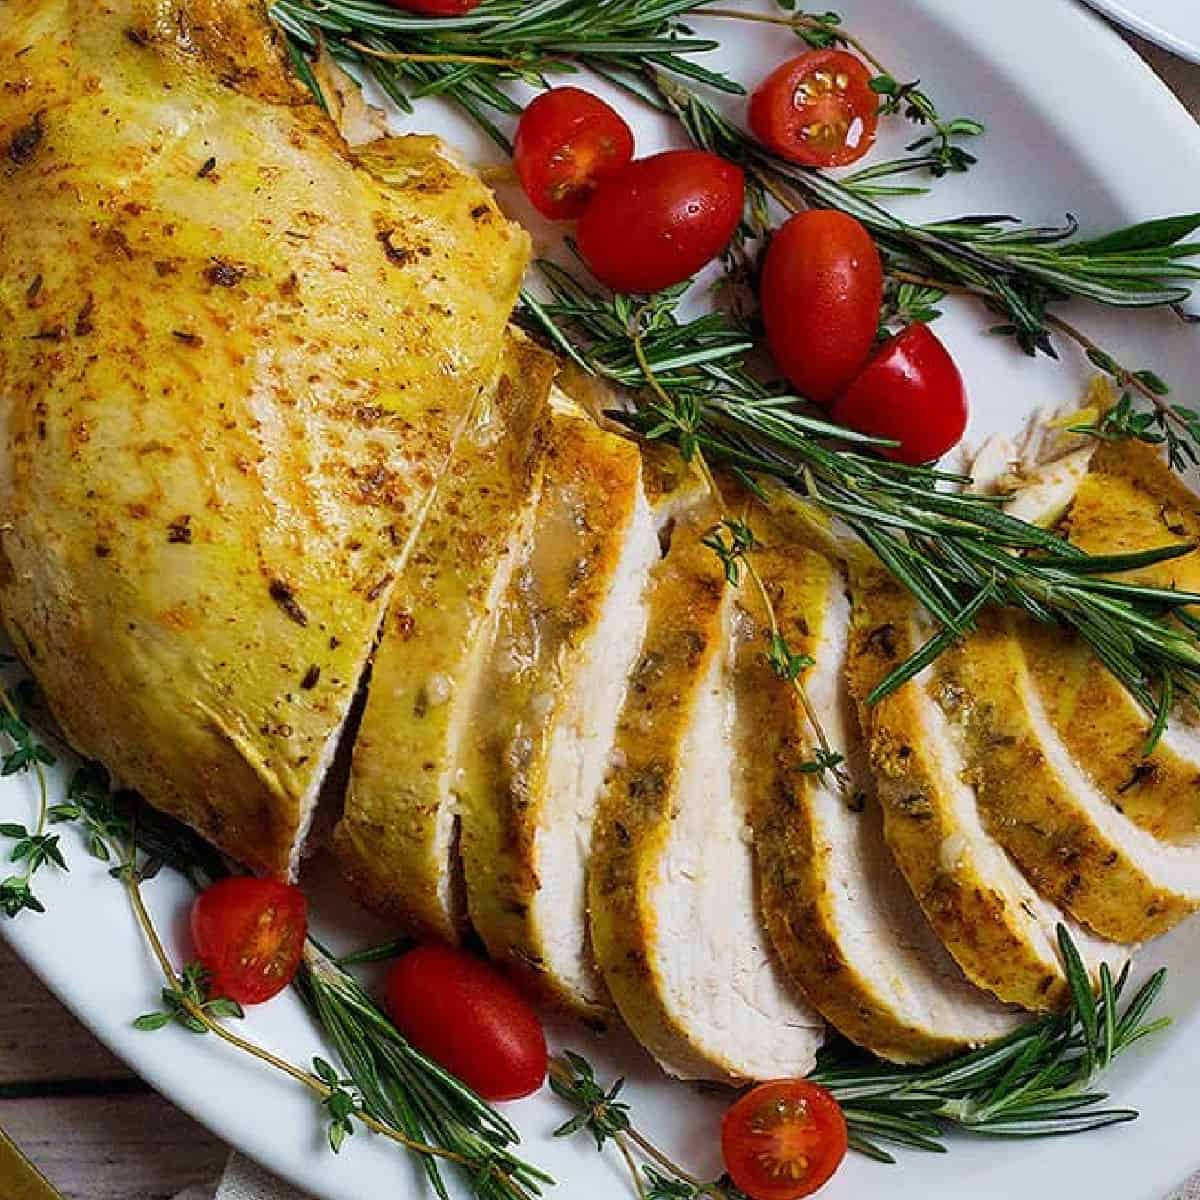 This slow cooker turkey breast recipe is a simple method that will always give you juicy and moist turkey breast with minimal preparation. It's perfect for Thanksgiving and the holidays!
